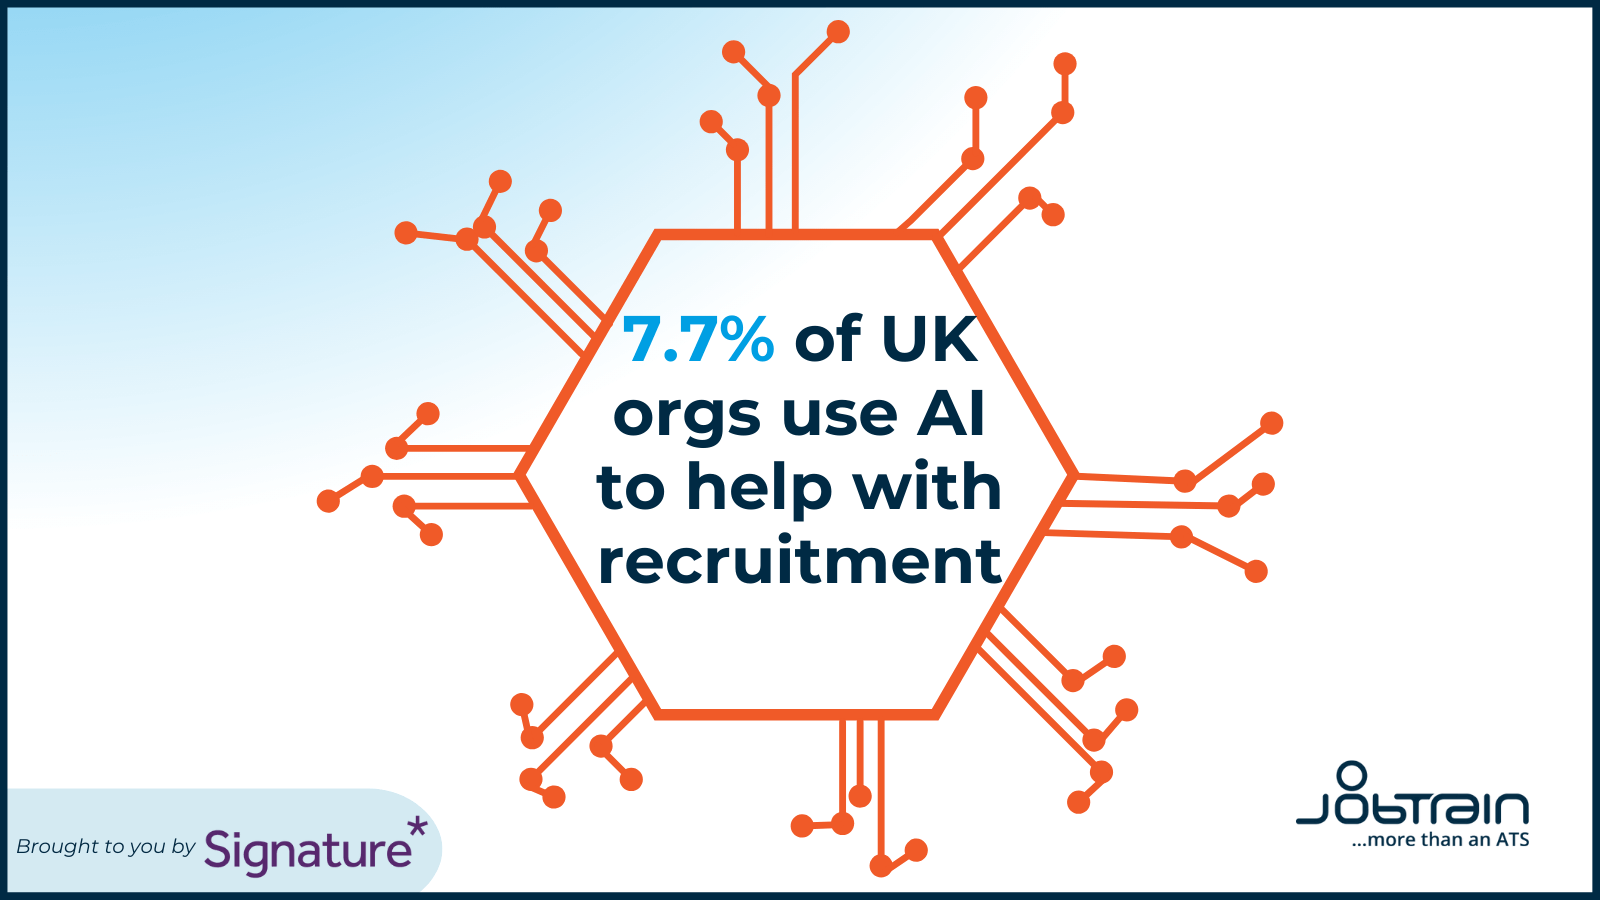 7.7% of UK orgs use AI to help with recruitment